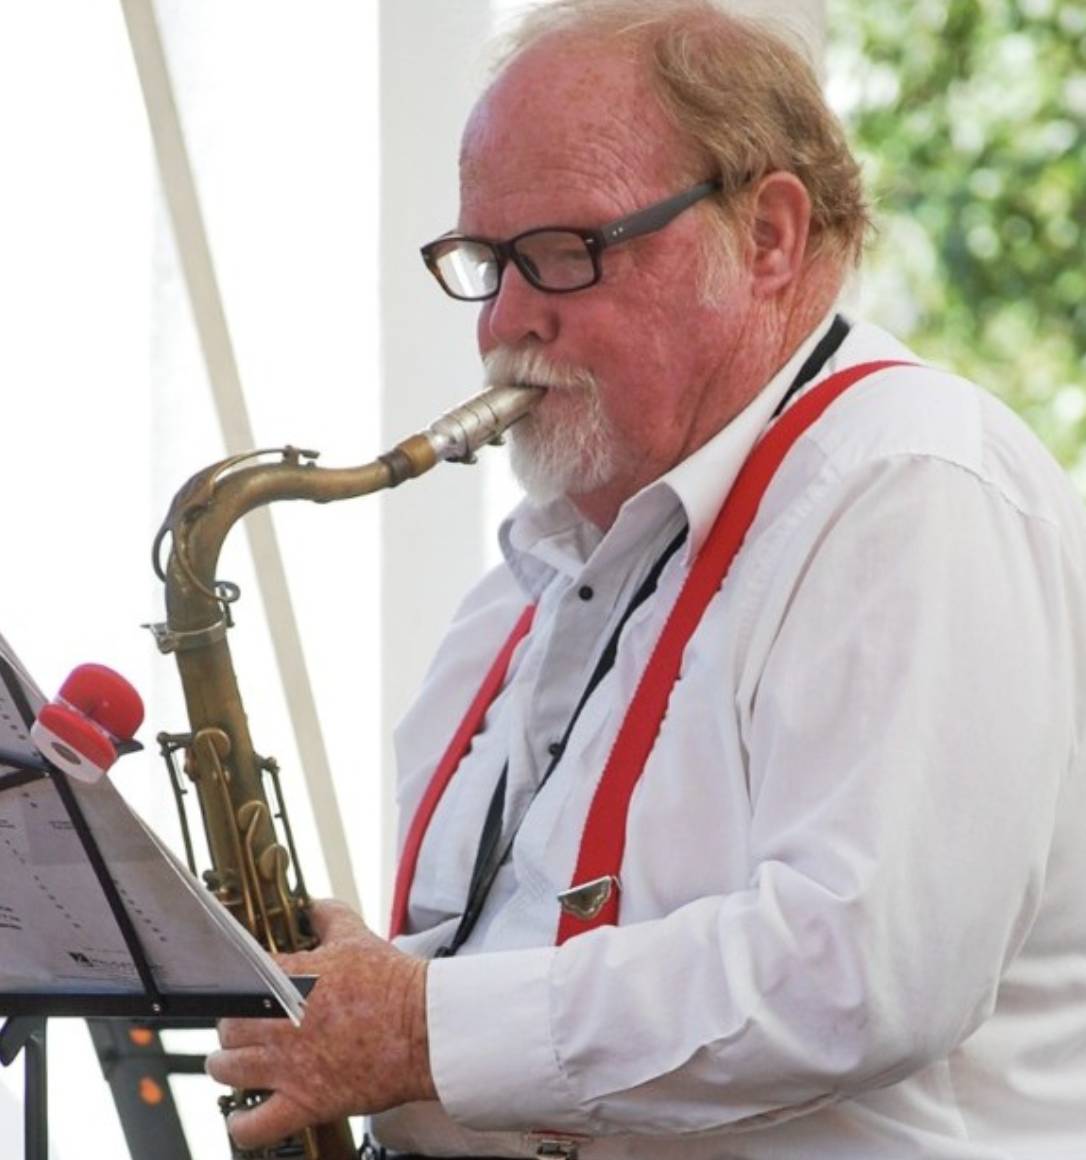 A man with glasses and suspenders playing a saxophone.